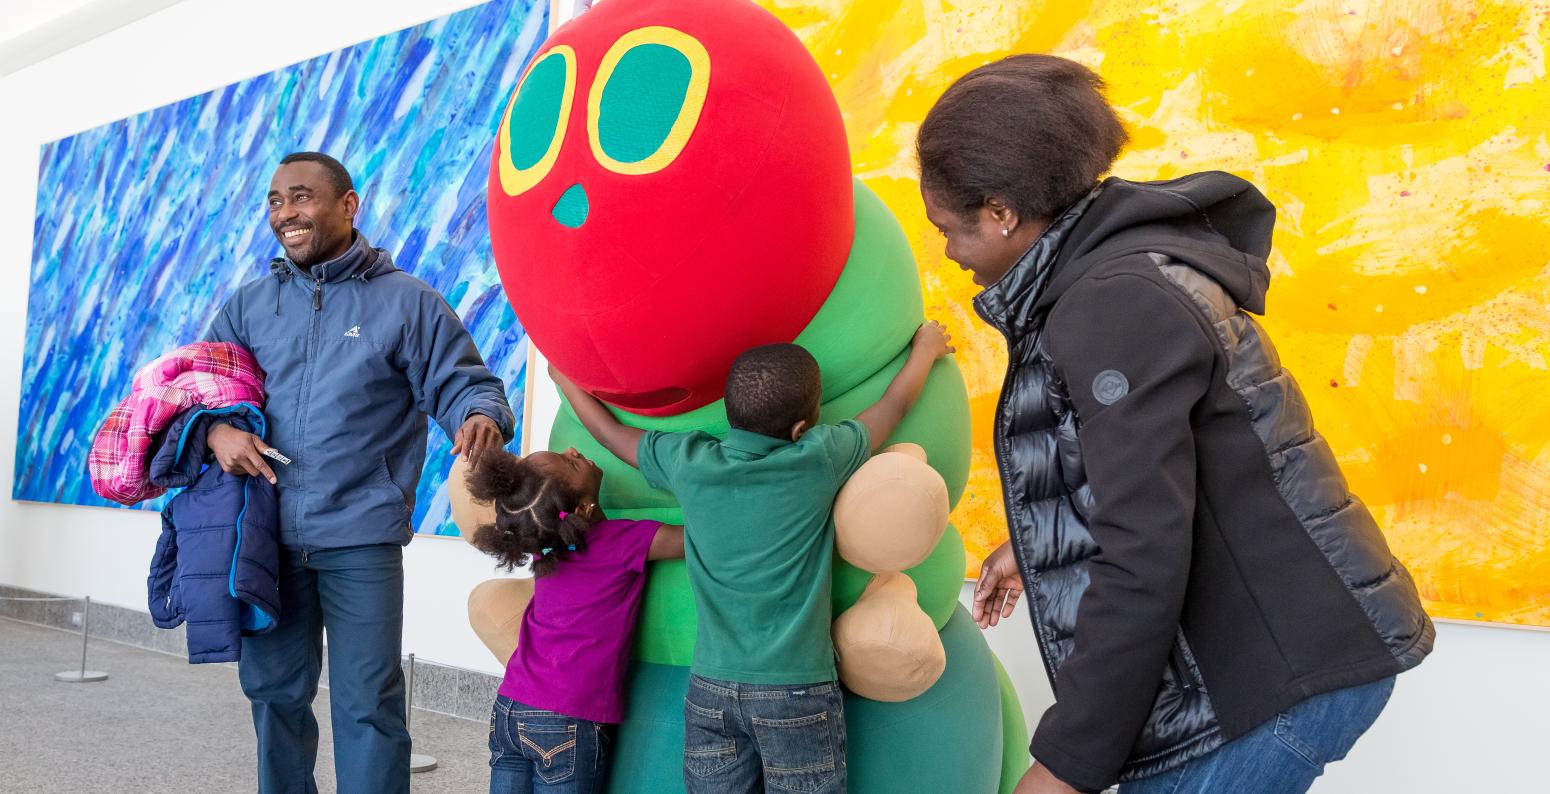 Two children hug The Very Hungry Caterpillar costume character, with two caregivers smiling and standing nearby.